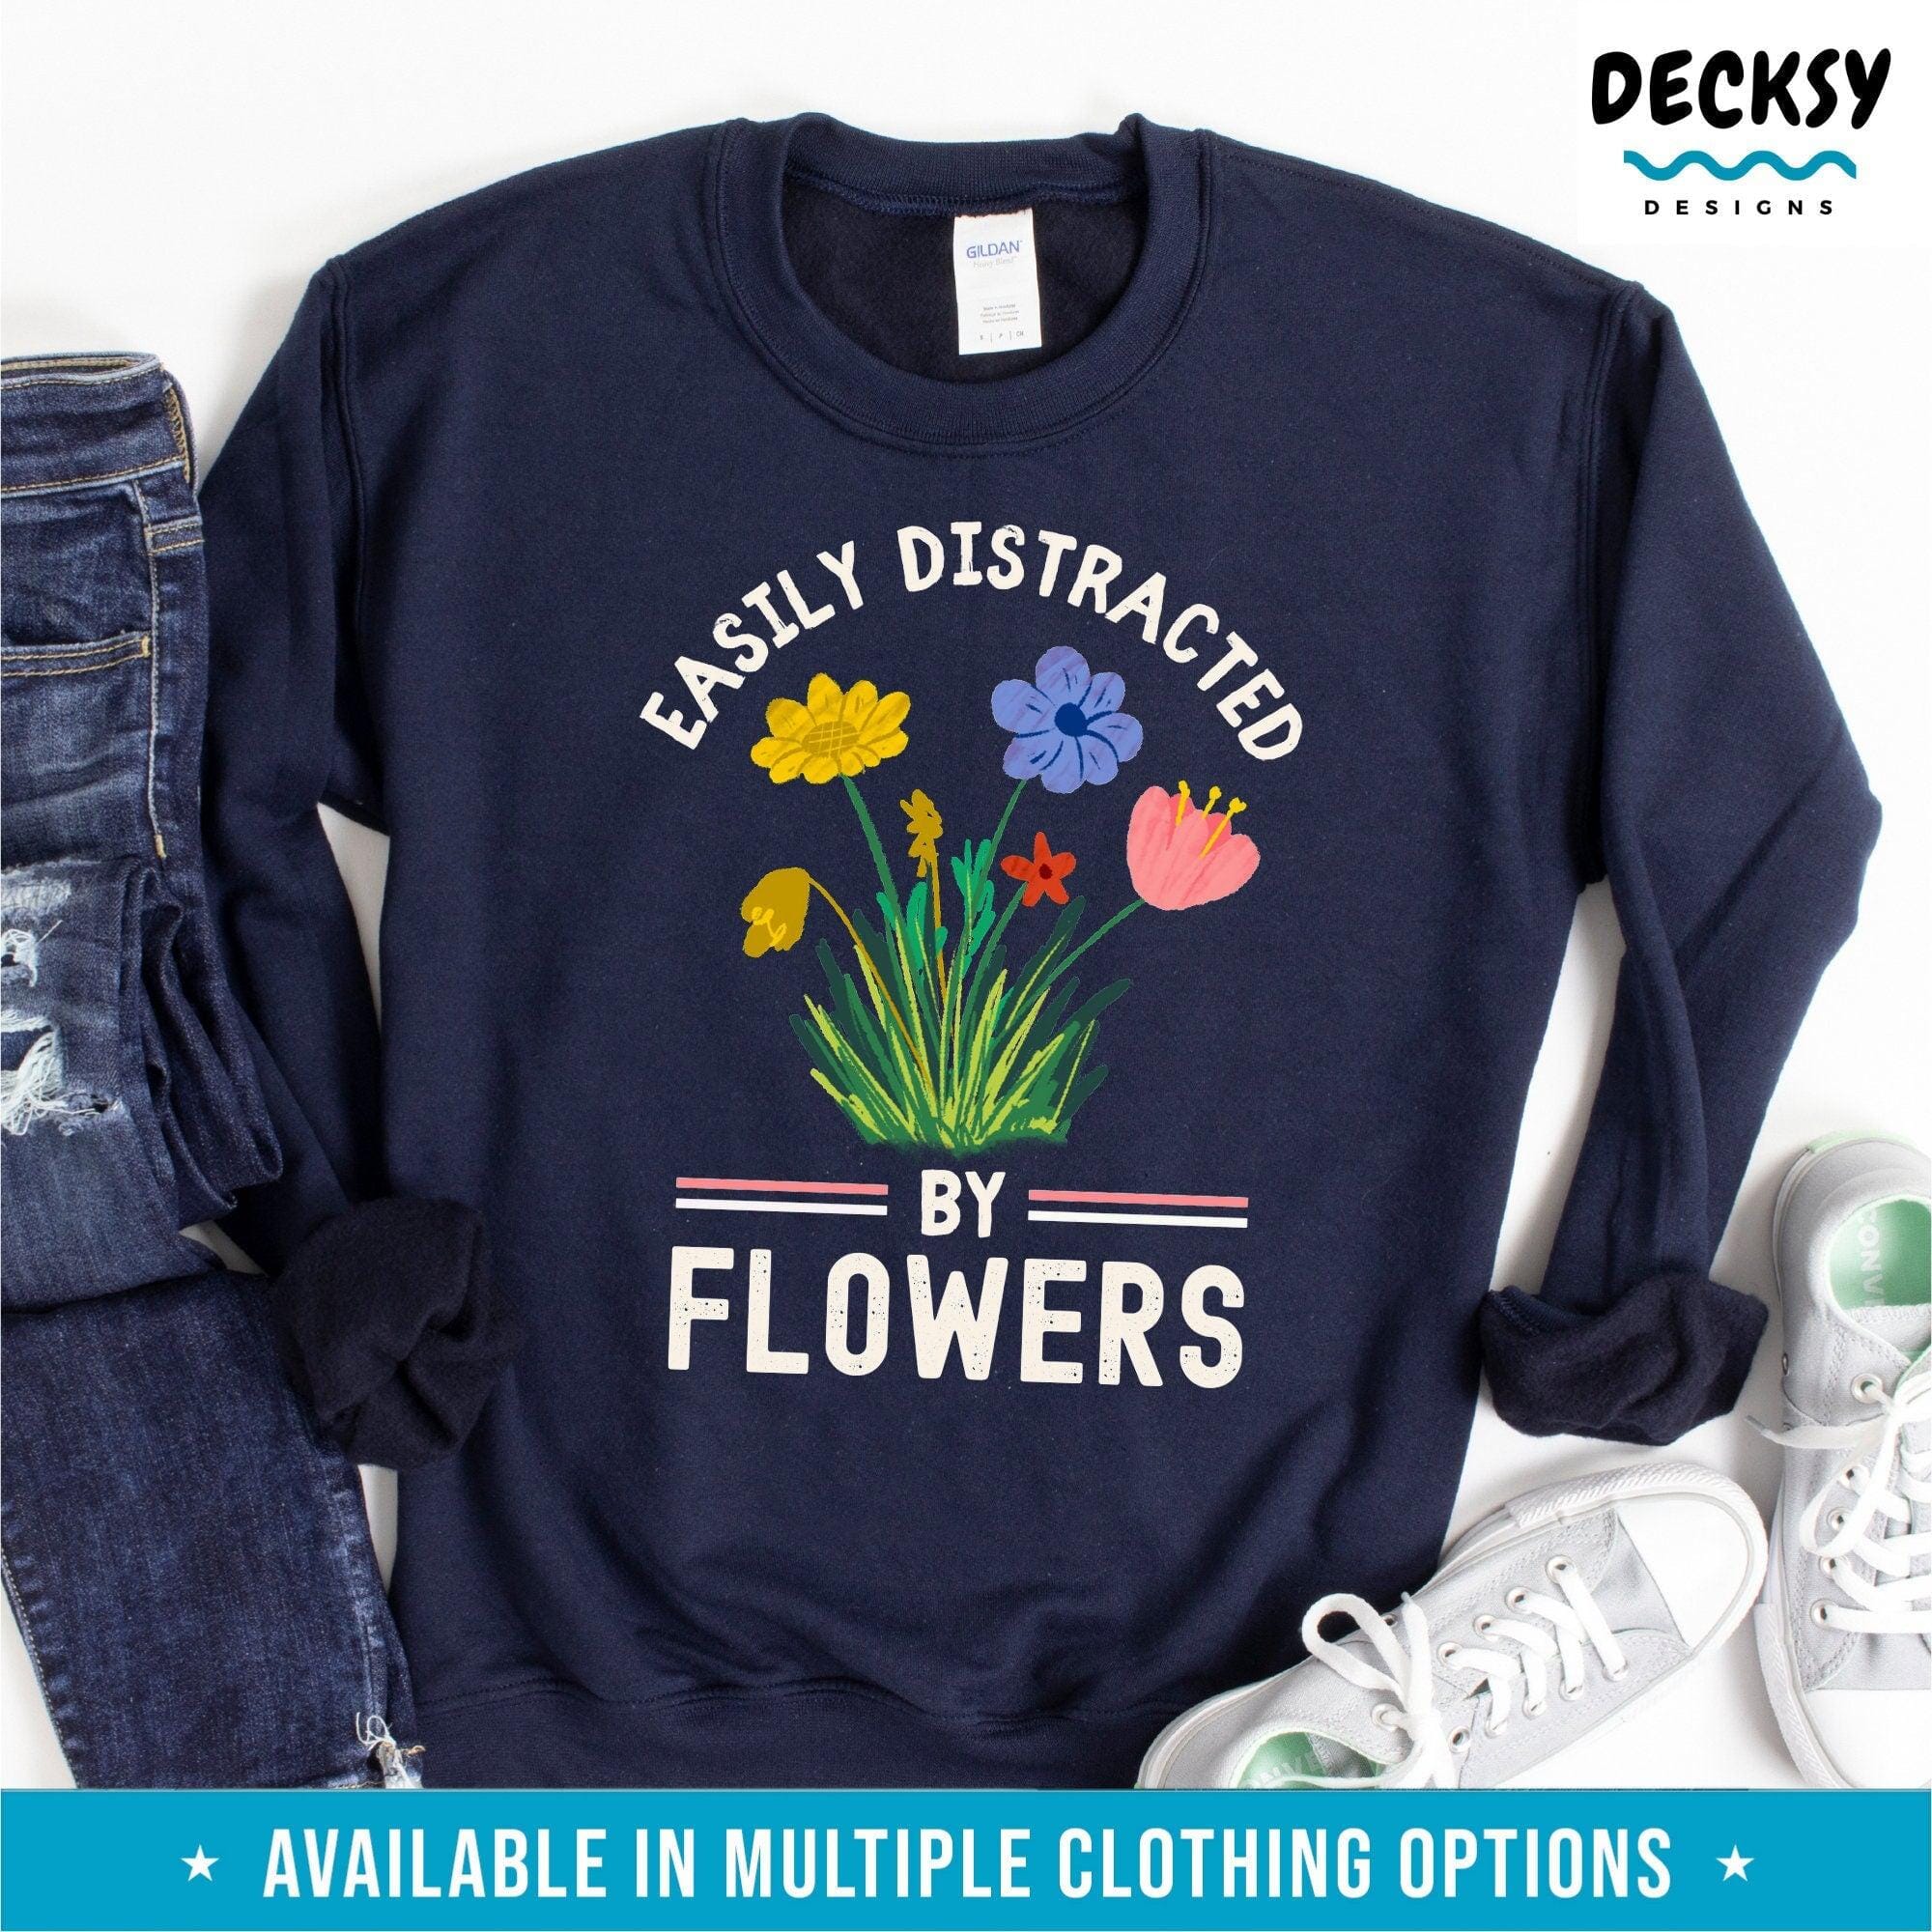 Flower Tshirt, Botanical Wildflowers Gift-Clothing:Gender-Neutral Adult Clothing:Tops & Tees:T-shirts:Graphic Tees-DecksyDesigns